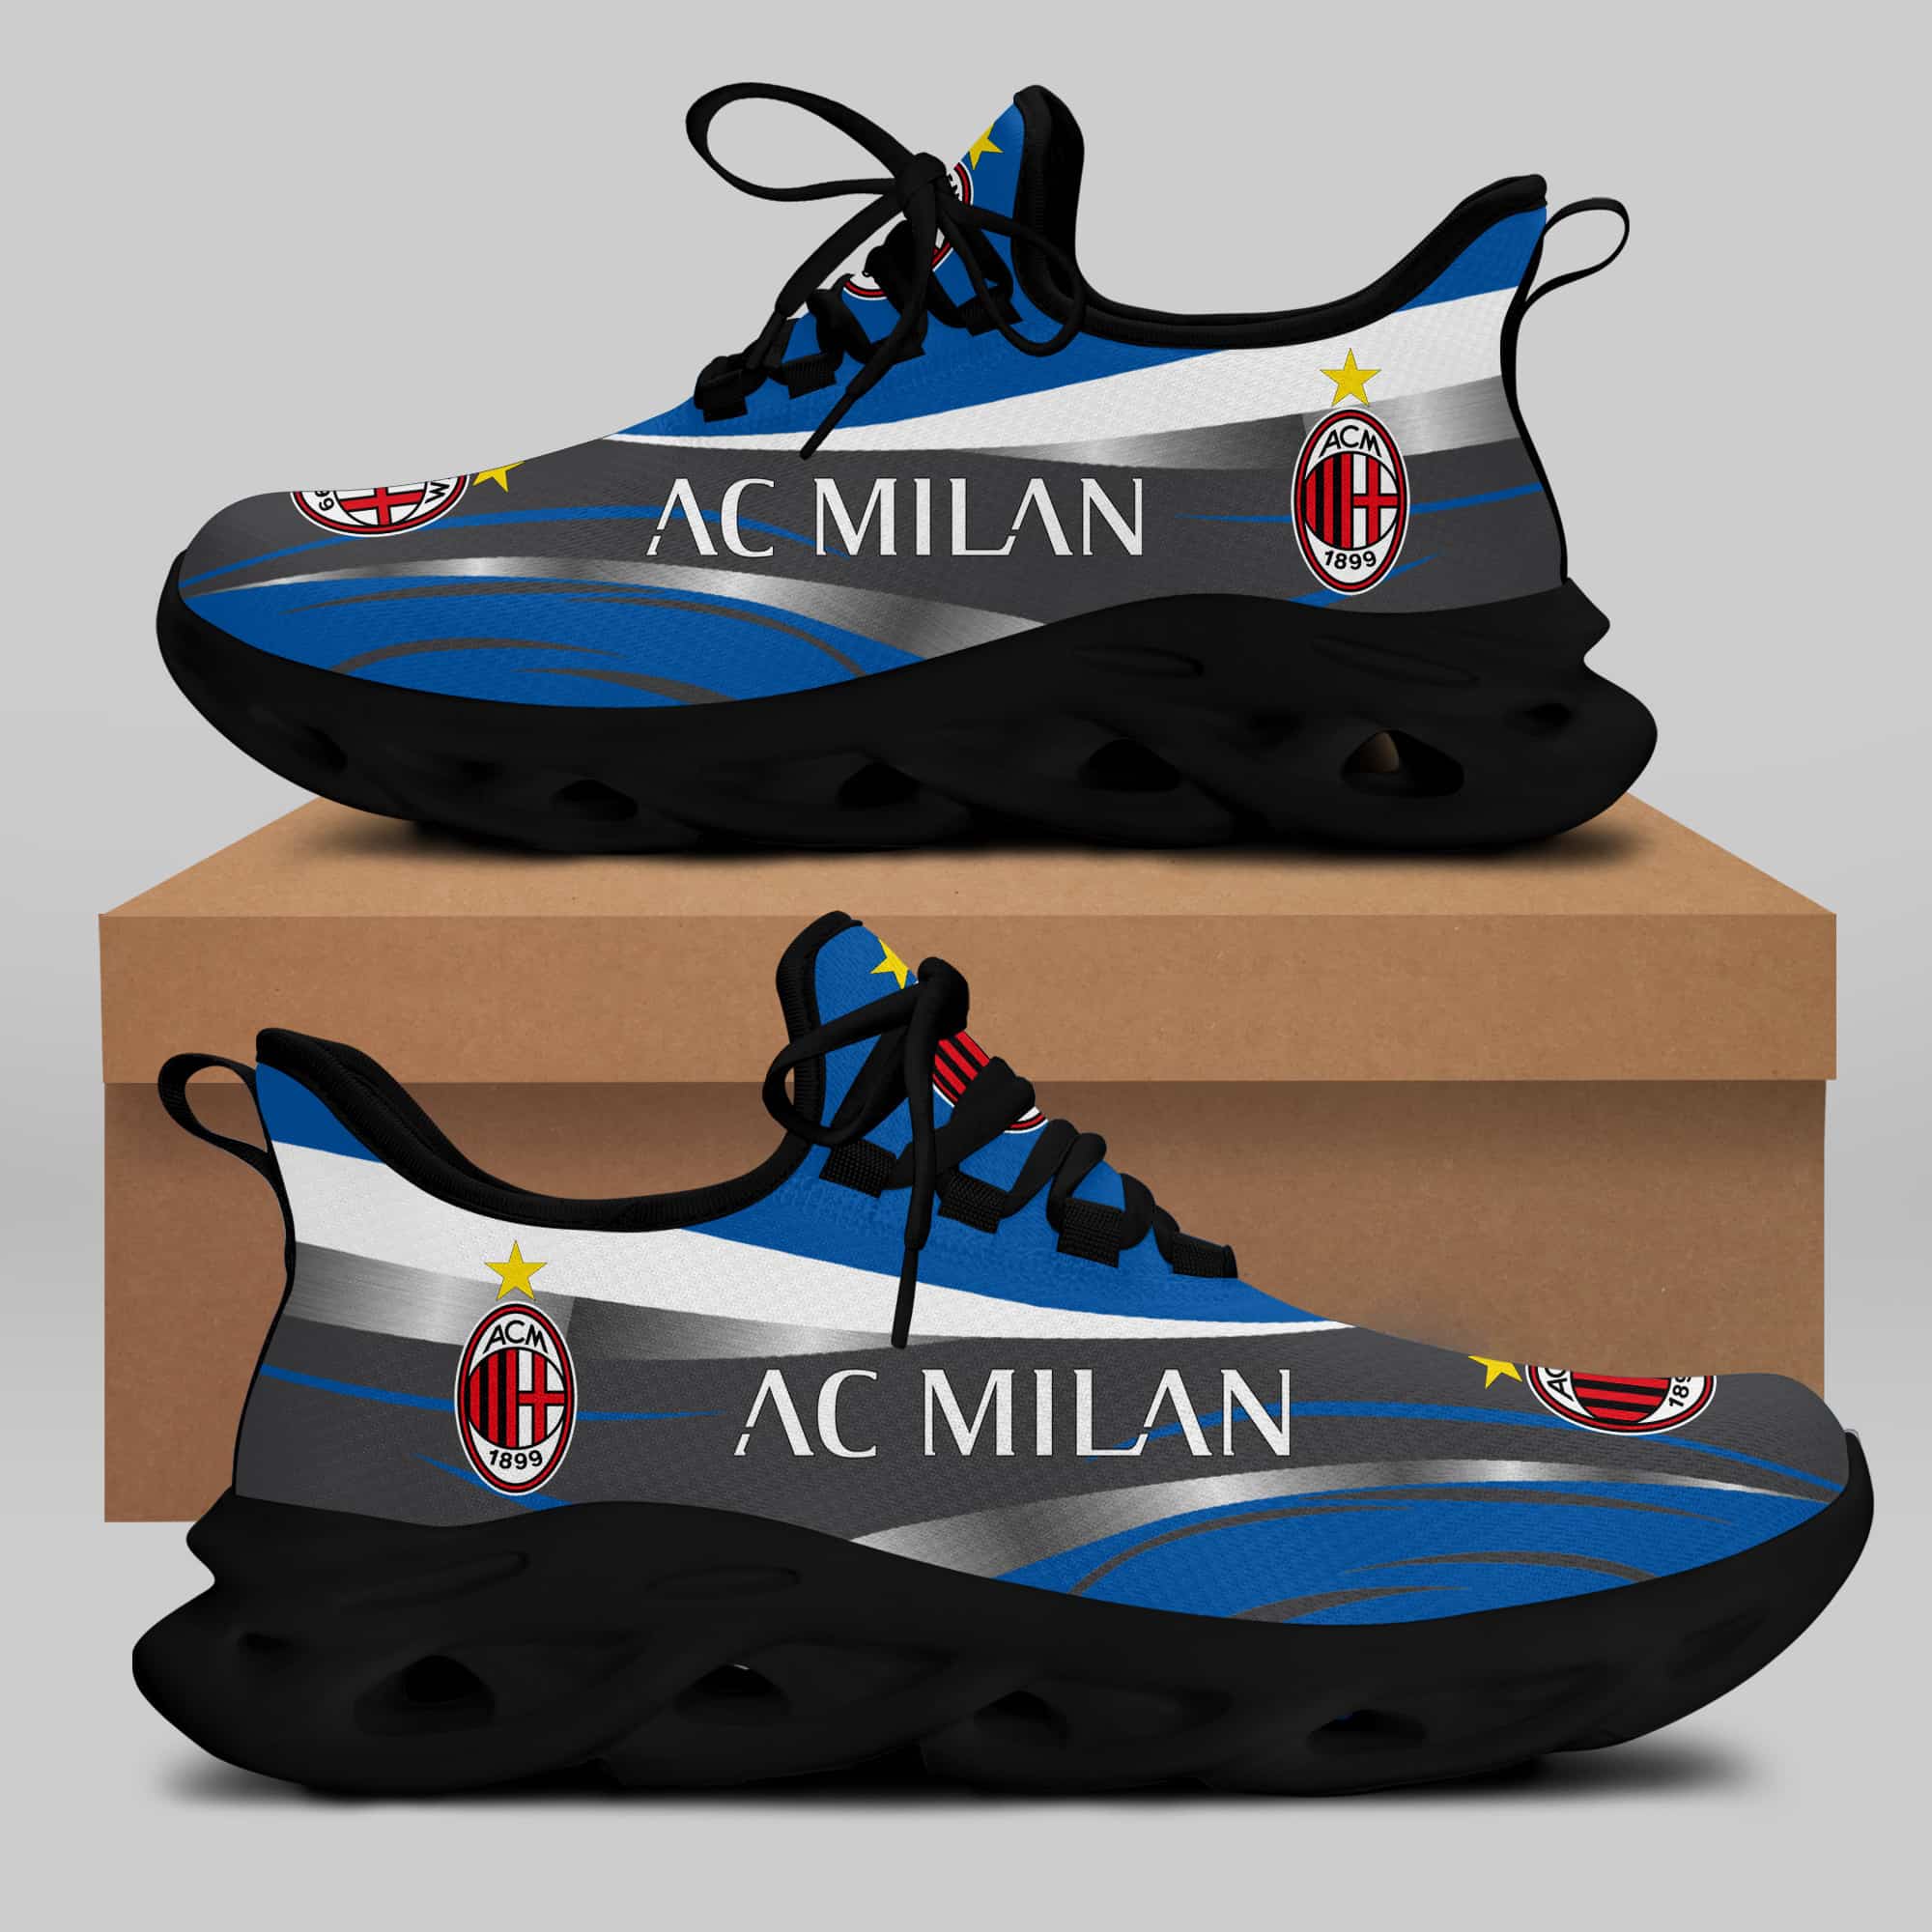 Ac Milan Running Shoes Max Soul Shoes Sneakers Ver 29 2